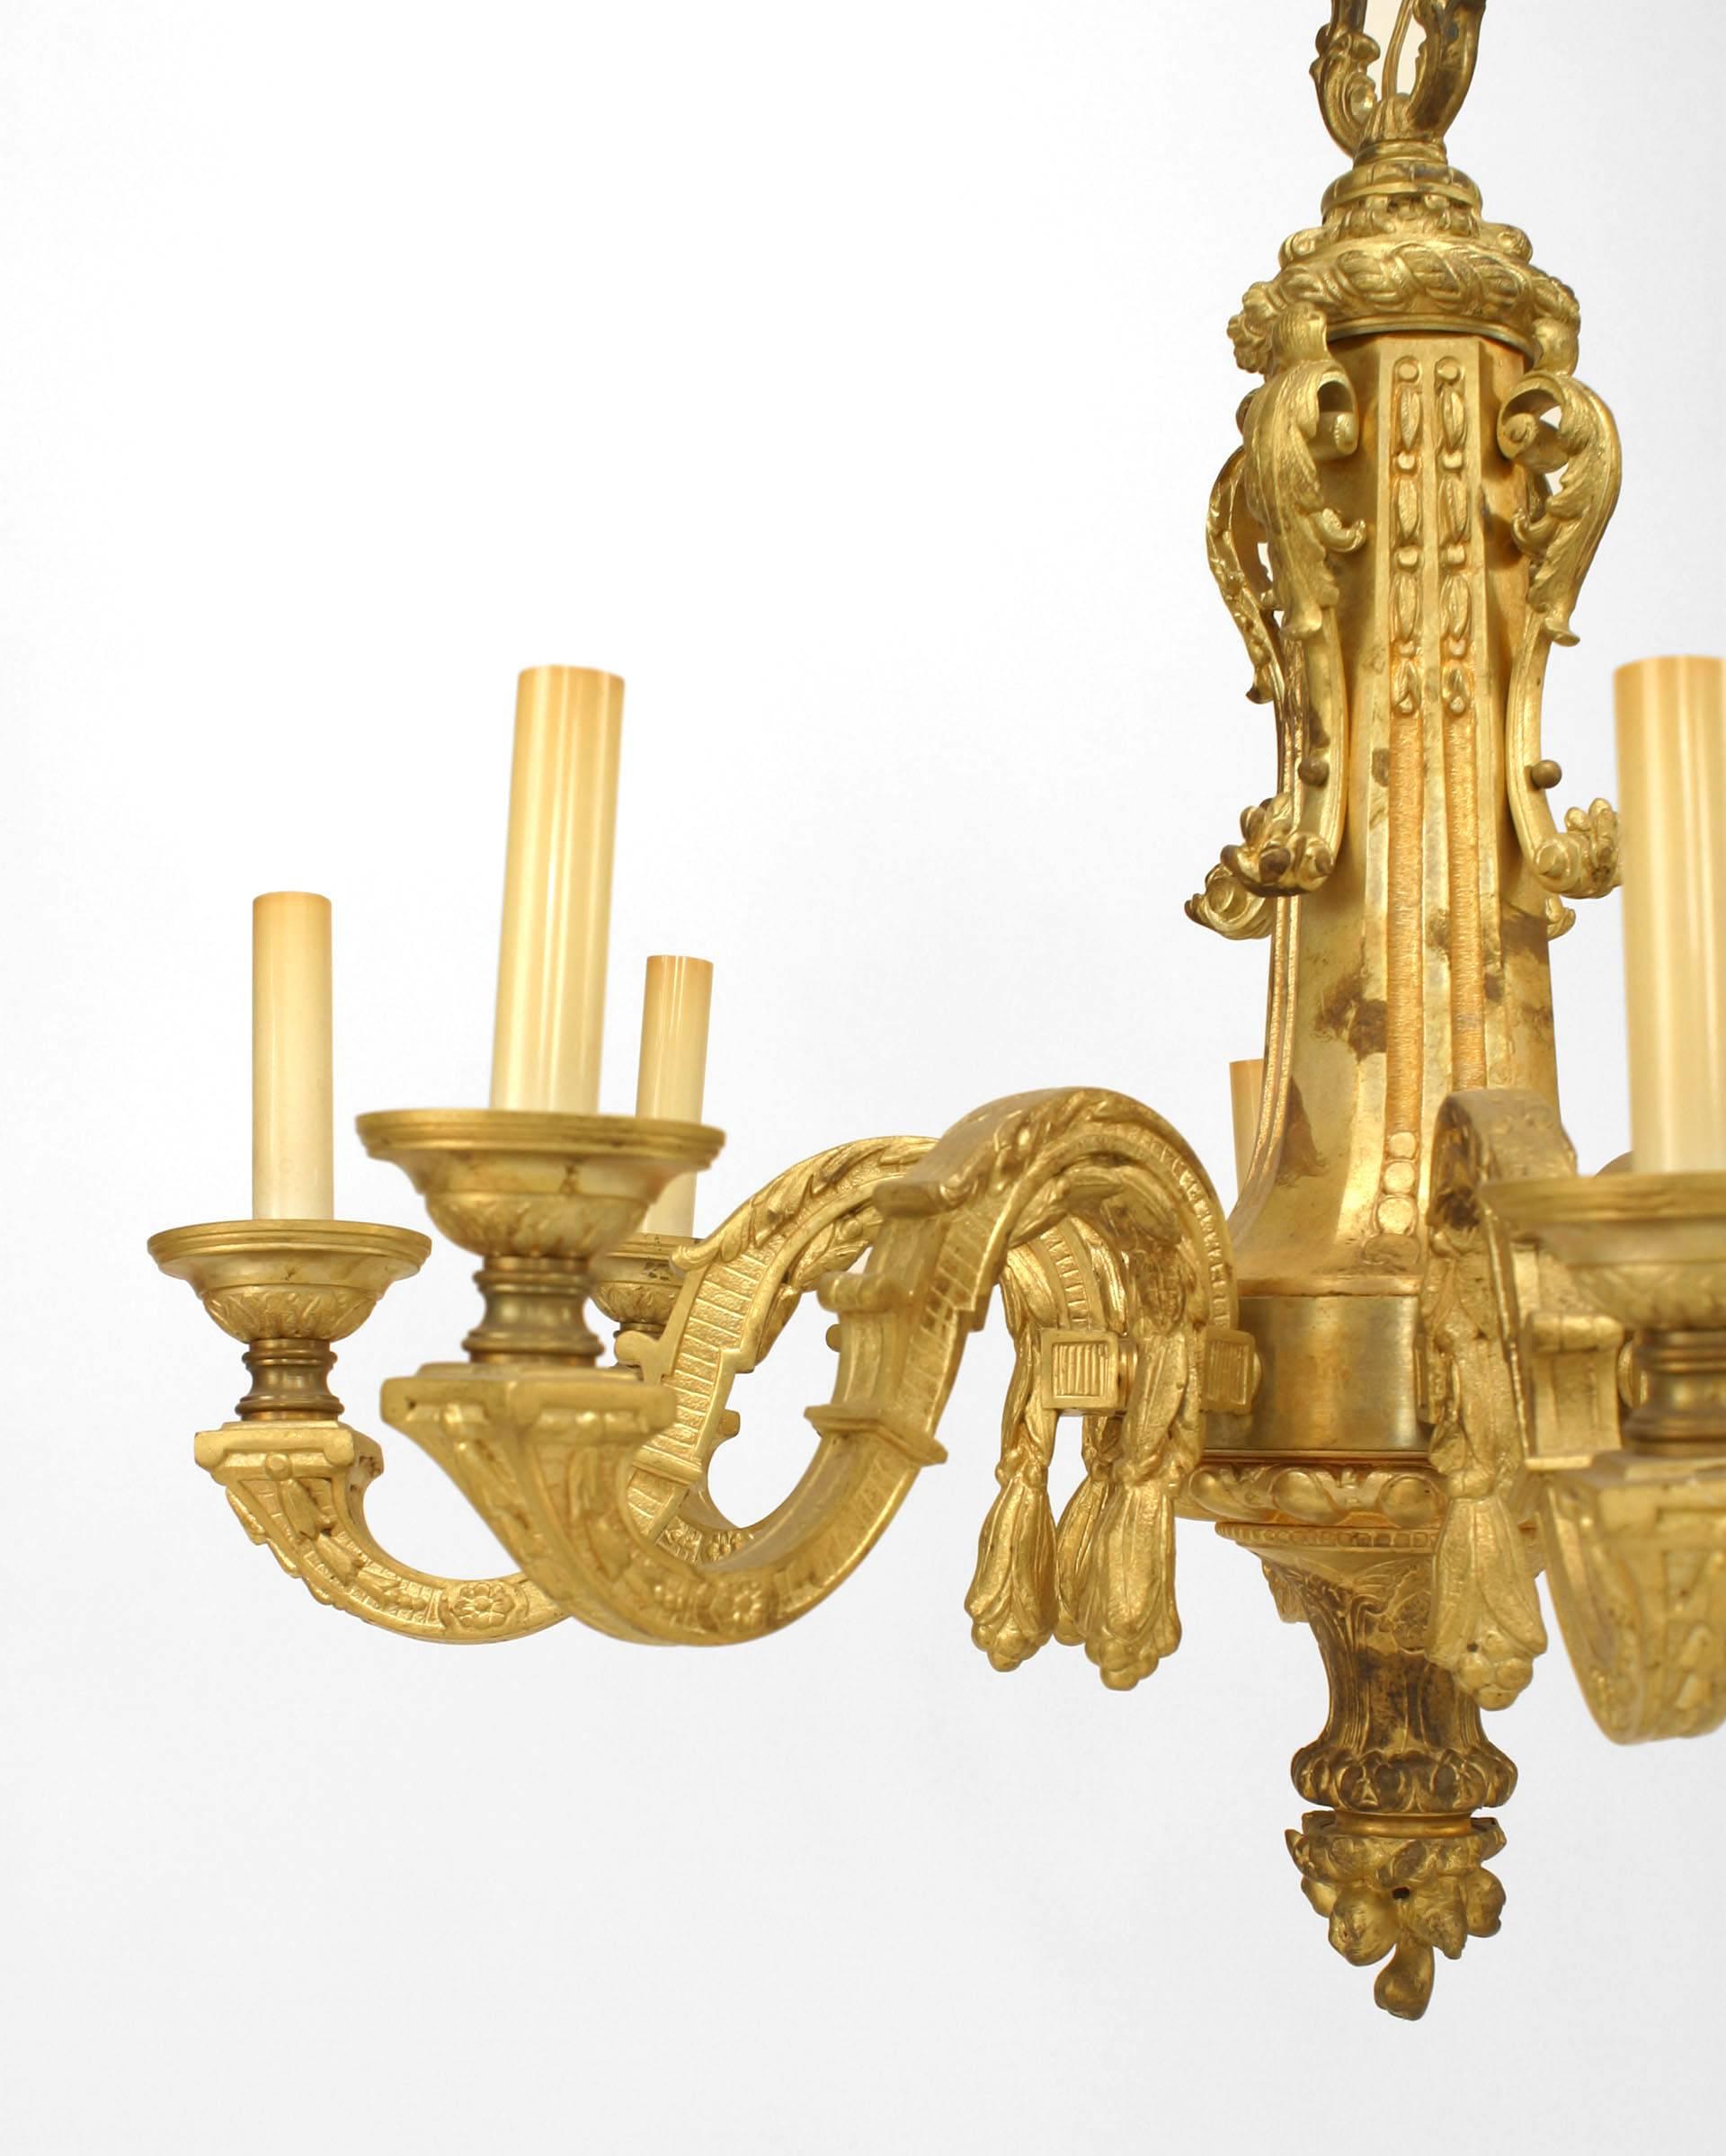 French Louis XVI-style (19th Century) gilt bronze chandelier with 8 scroll form arms emanating from a solid center shaft with a tapered finial bottom (with original chain)
